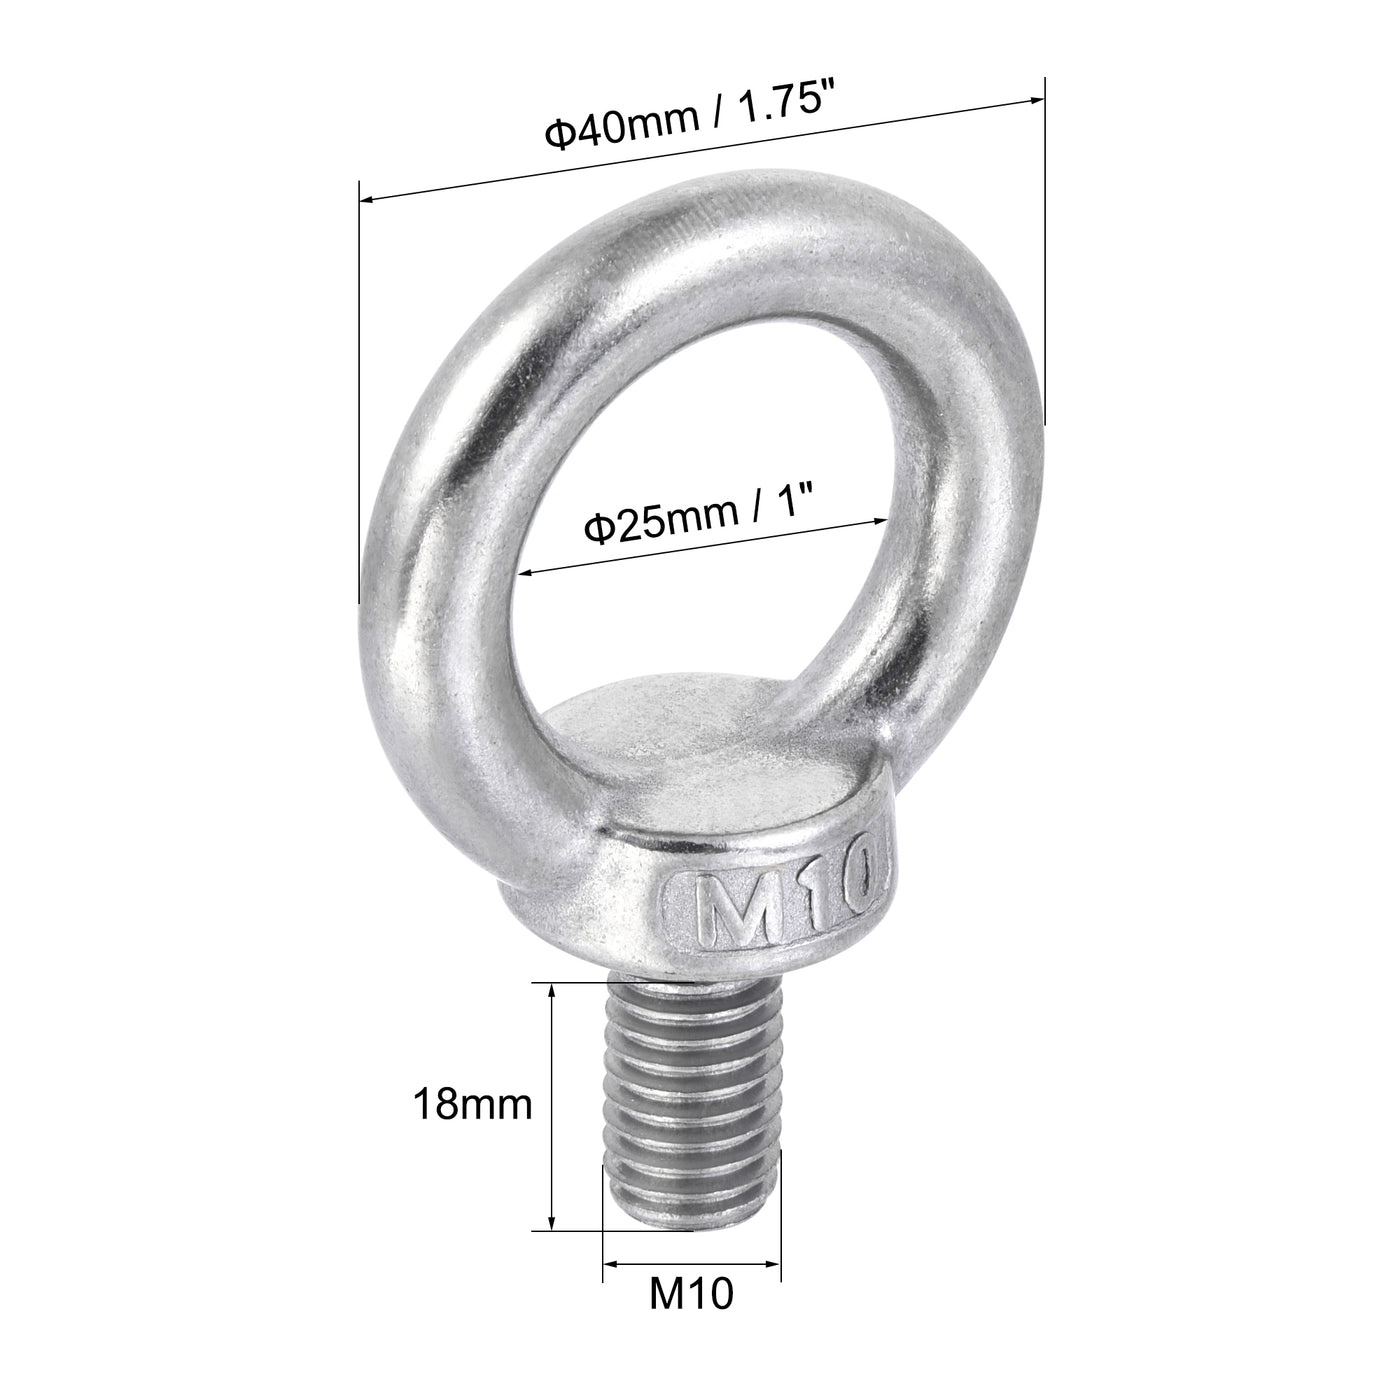 uxcell Uxcell Lifting Eye Bolt M10 x 18mm Male Thread with Hex Screw Nut Gasket Flat Washer for Hanging, 304 Stainless Steel, 6 Sets